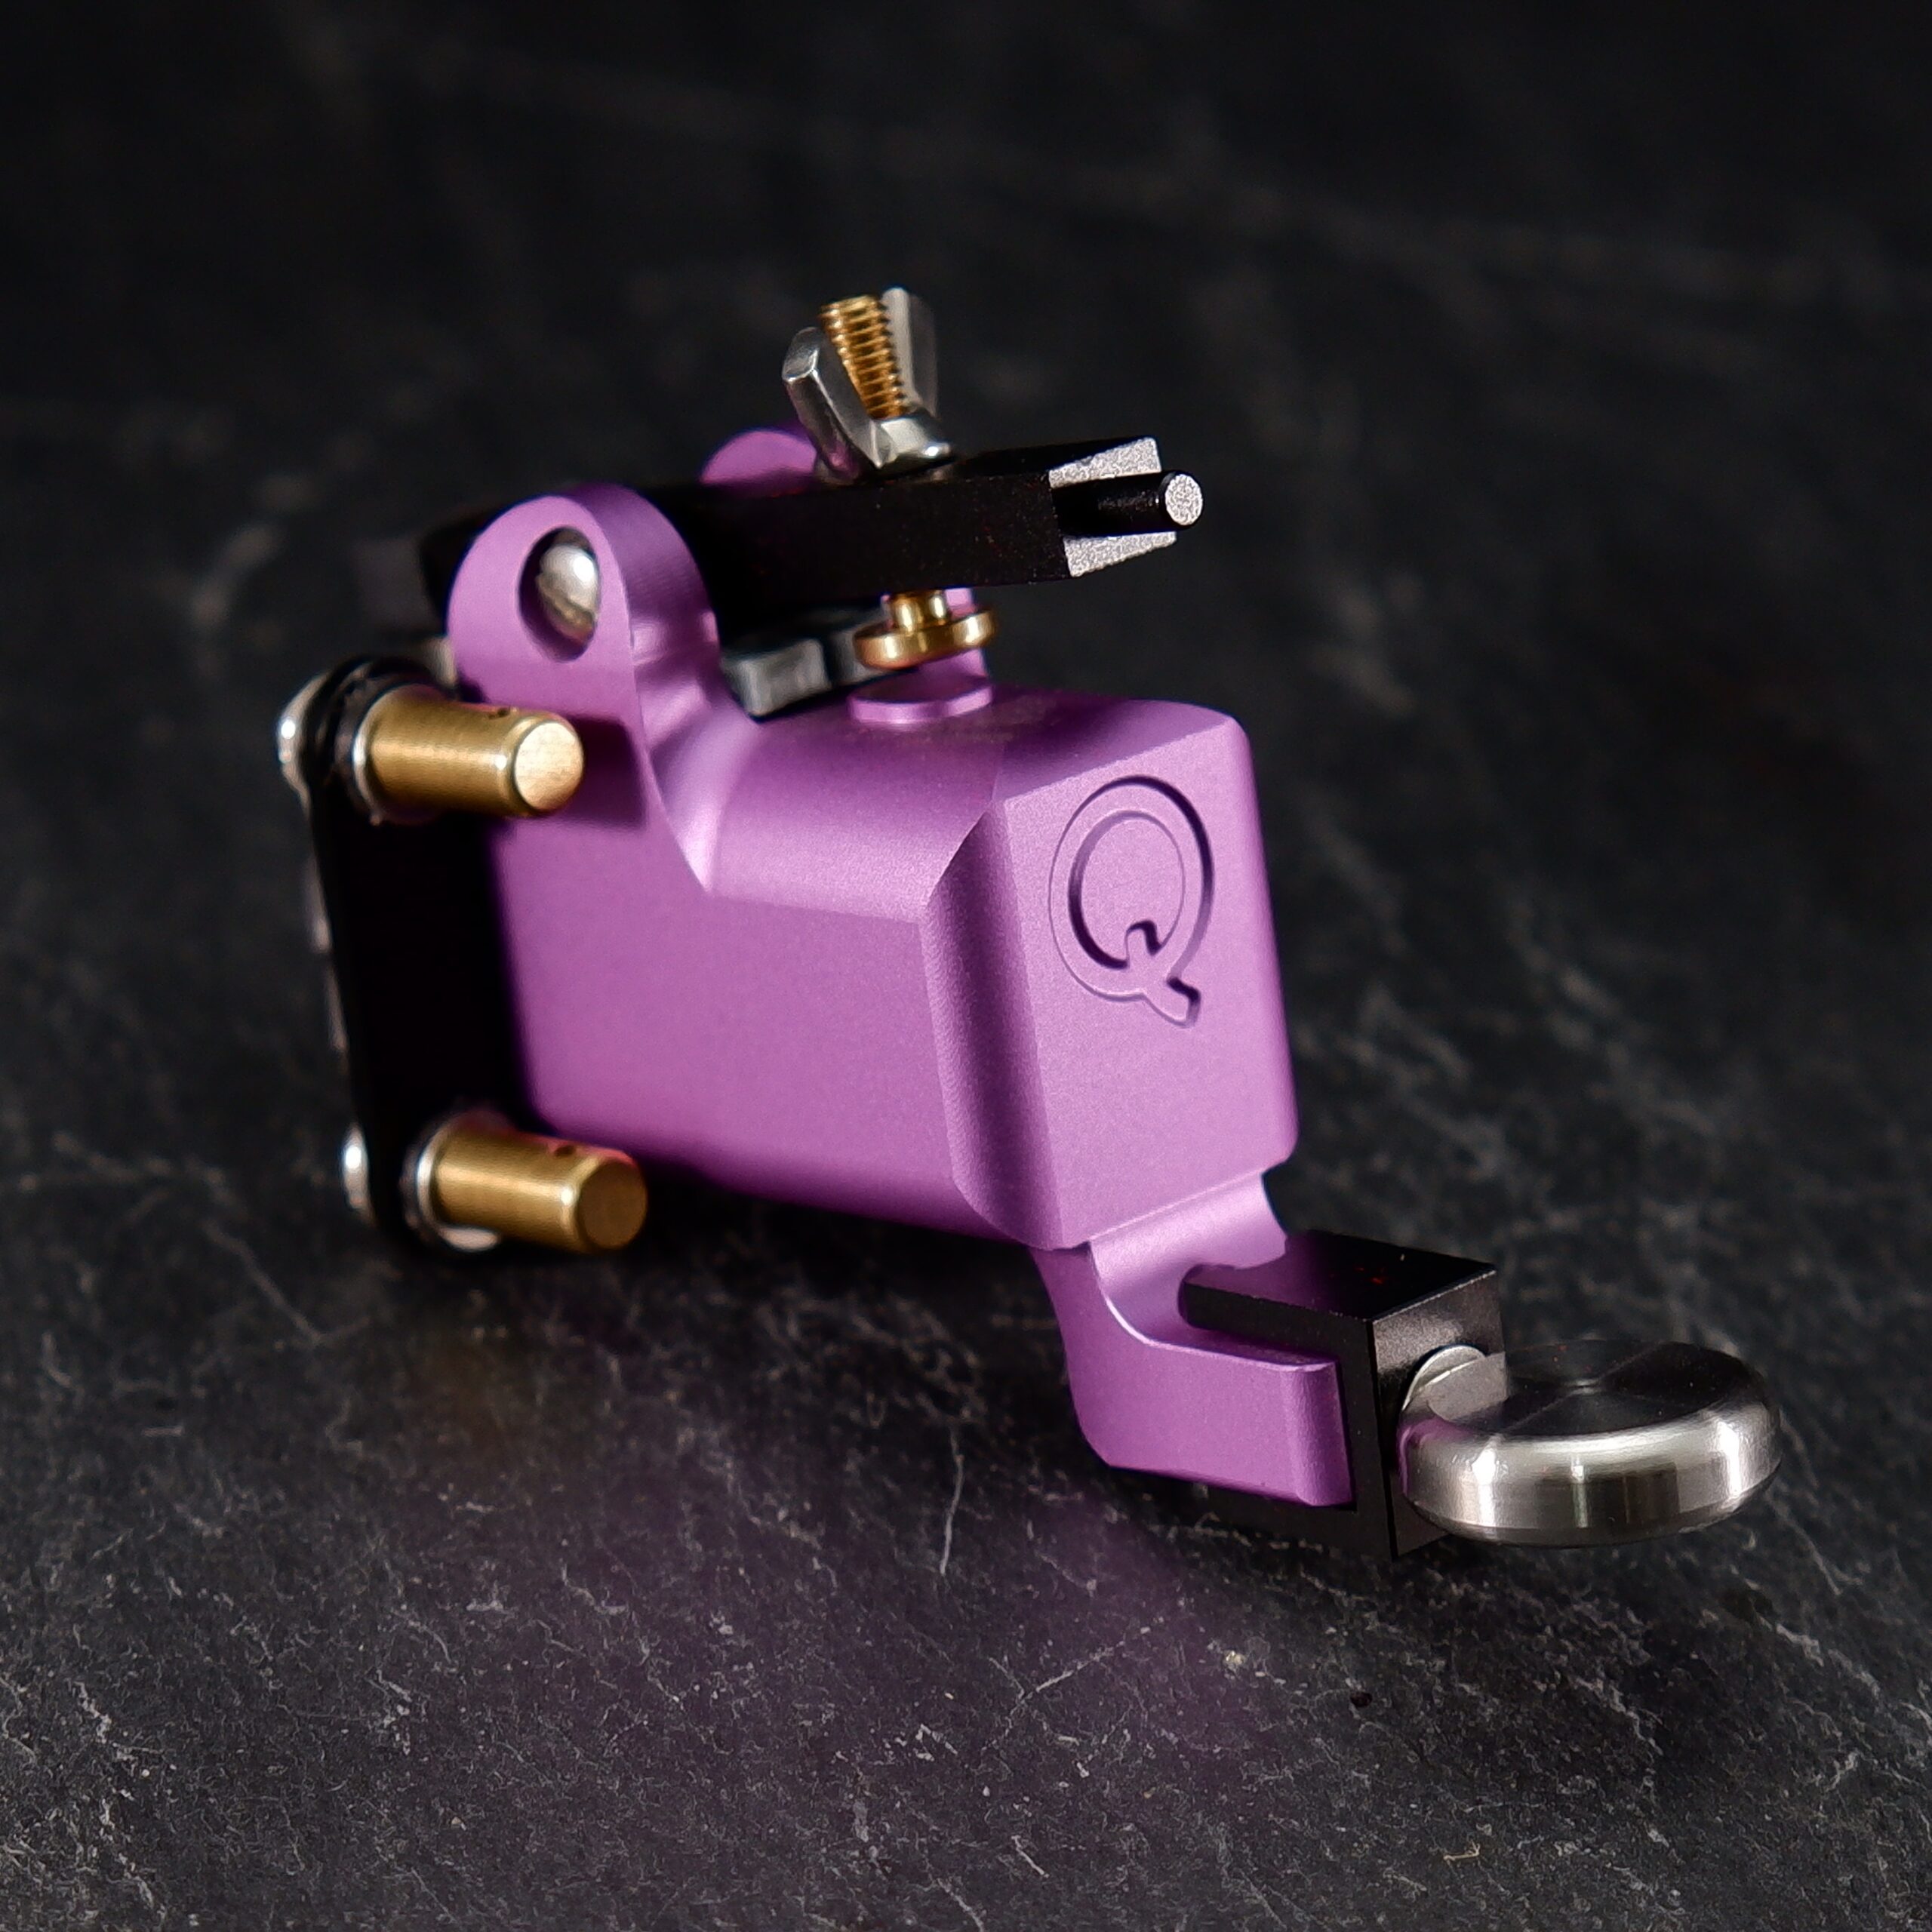 Tattoo Machine Pictures | Download Free Images on Unsplash